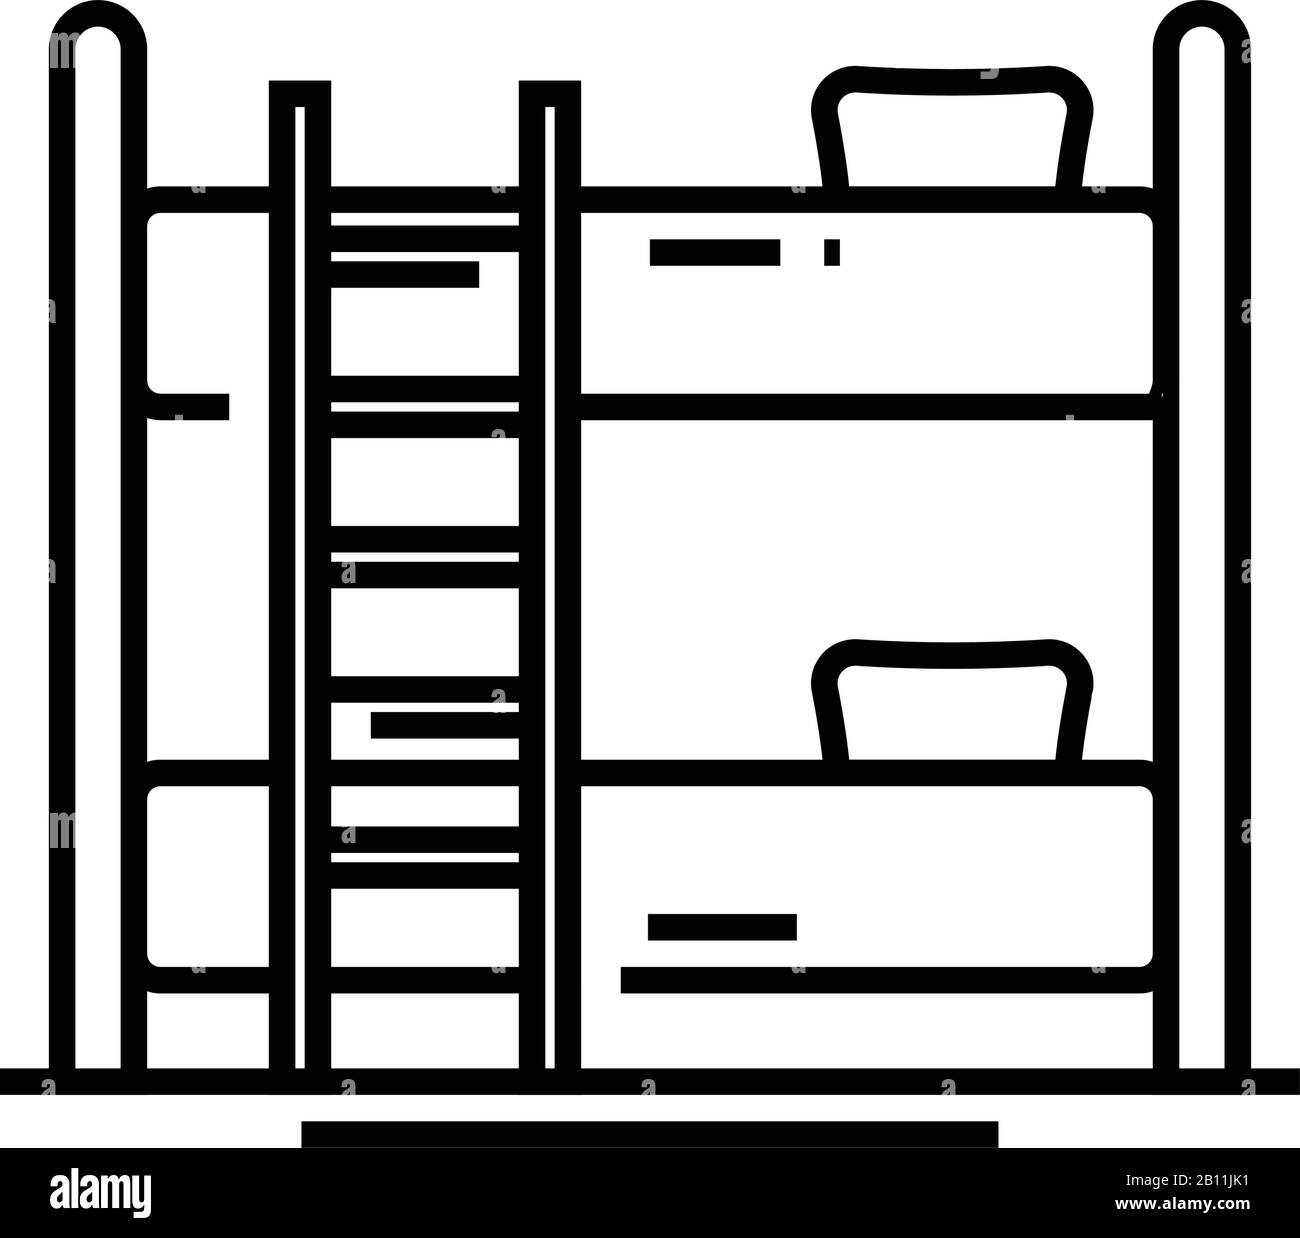 Side view flat illustration of bunk bed with stairs  CanStock